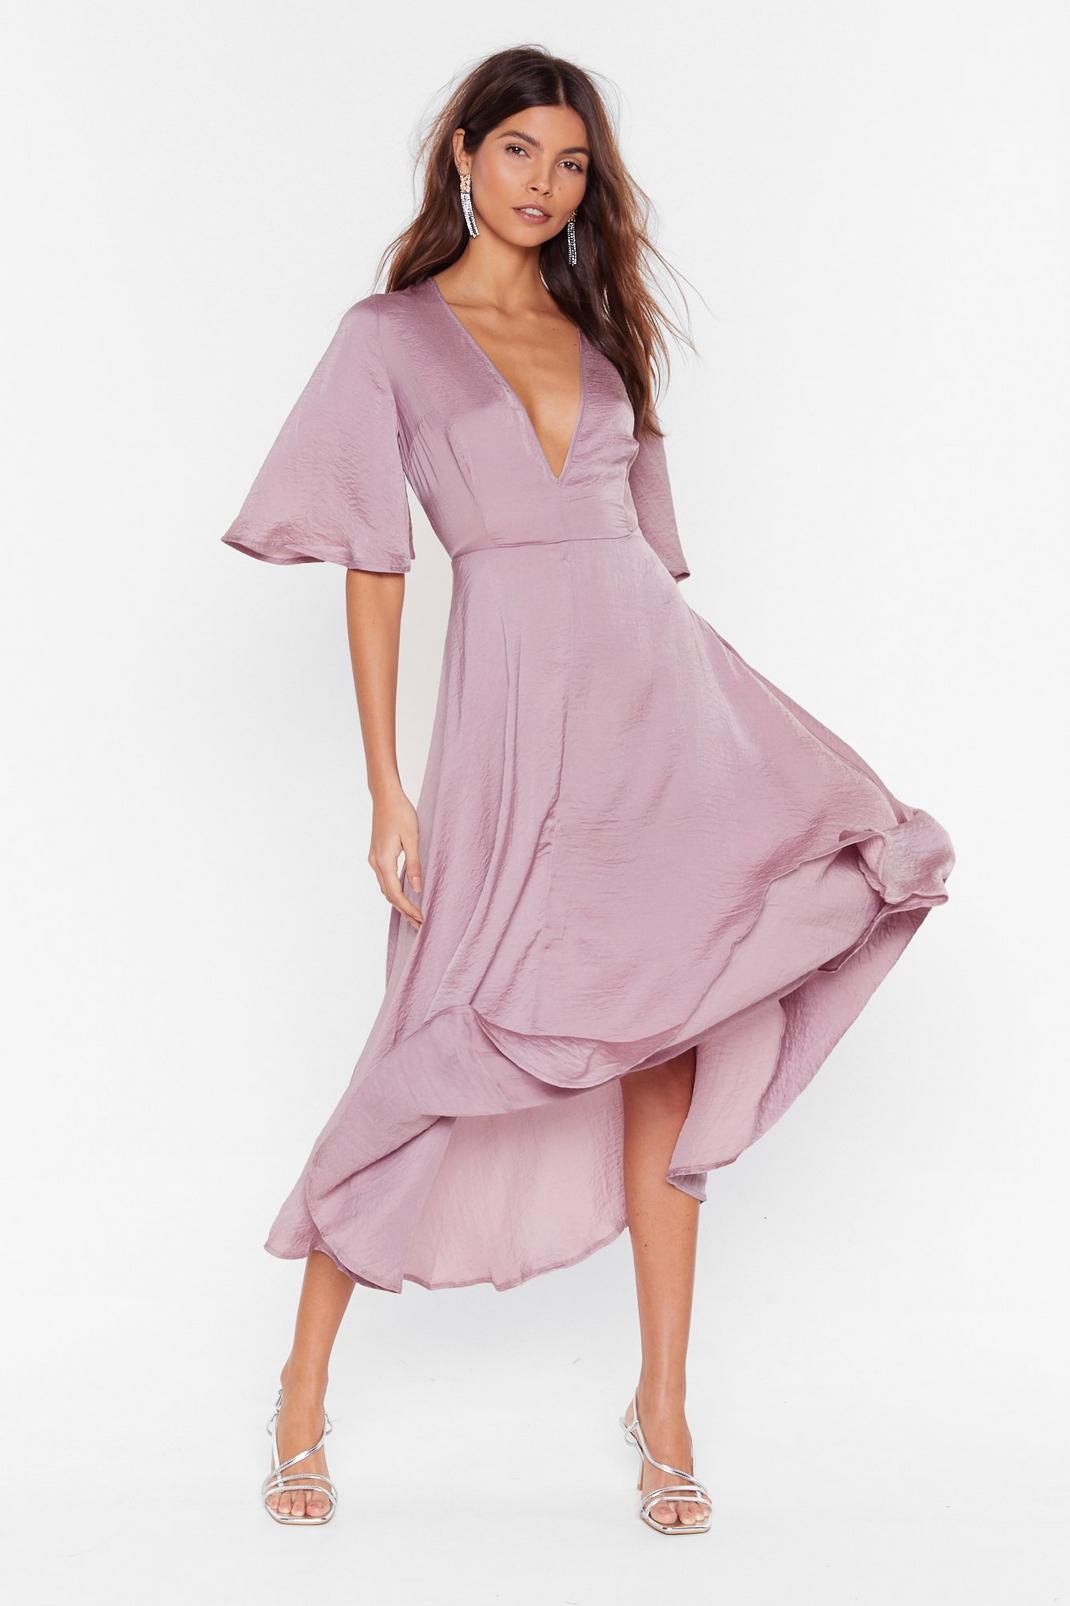 Give It a Whirl Plunging Dress | Nasty Gal